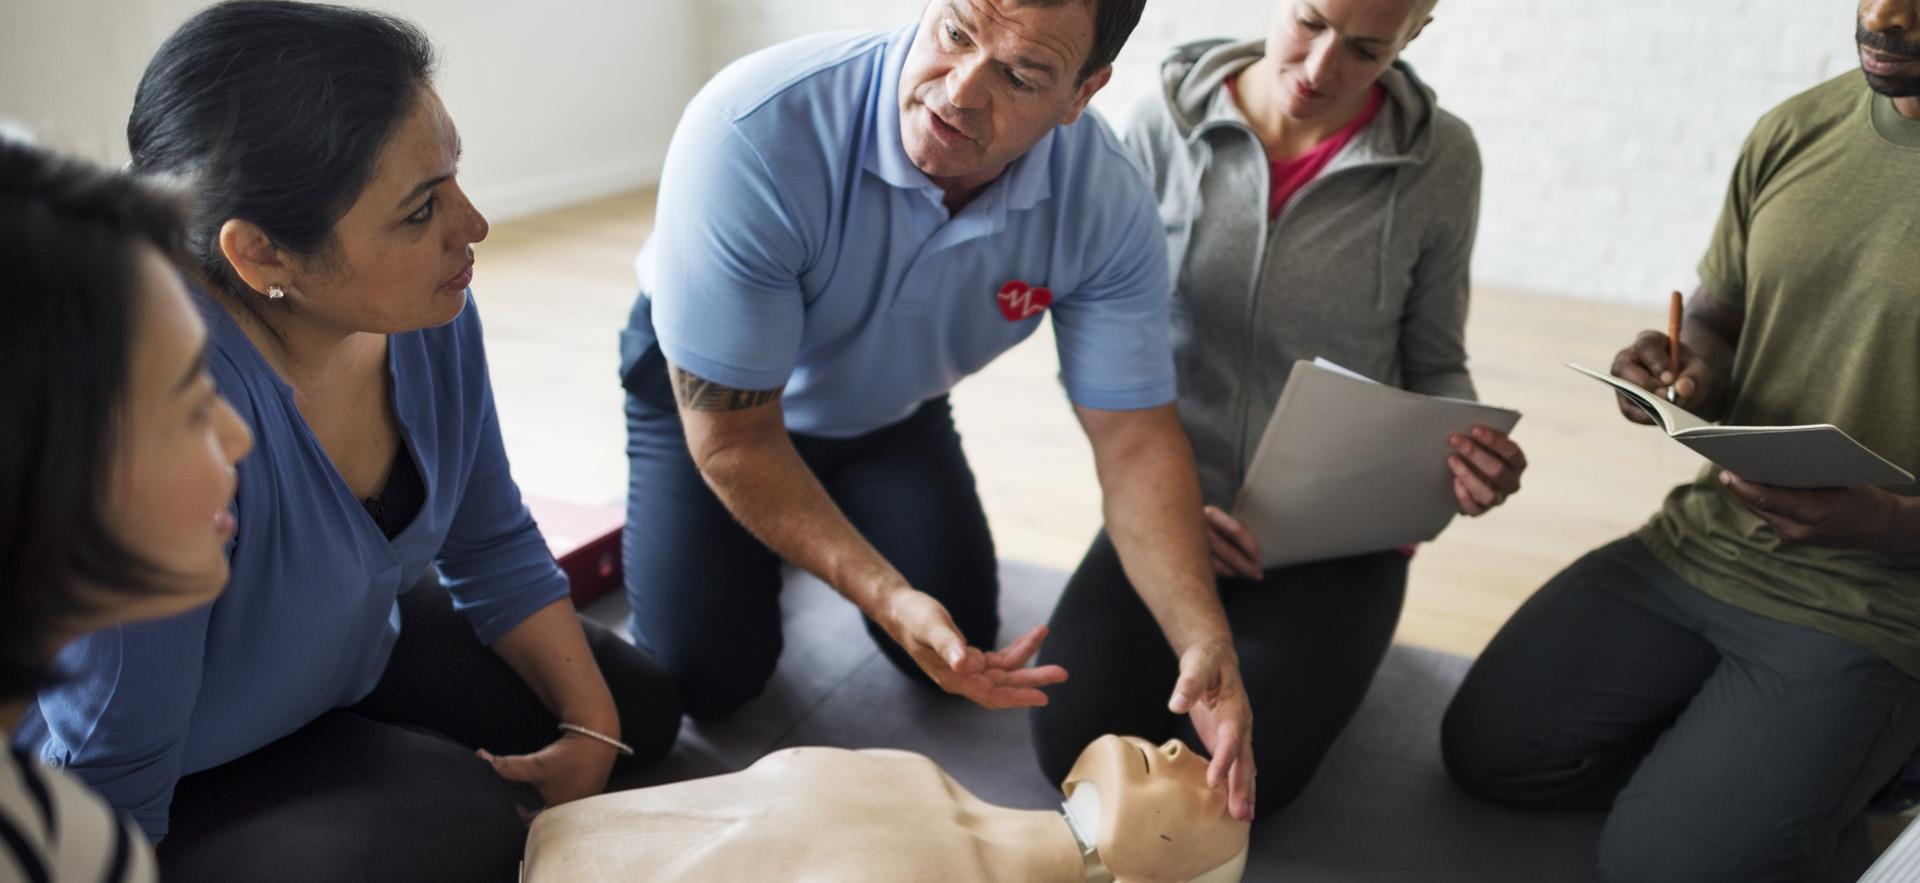 Instructor showing students CPR techniques on mannequin 